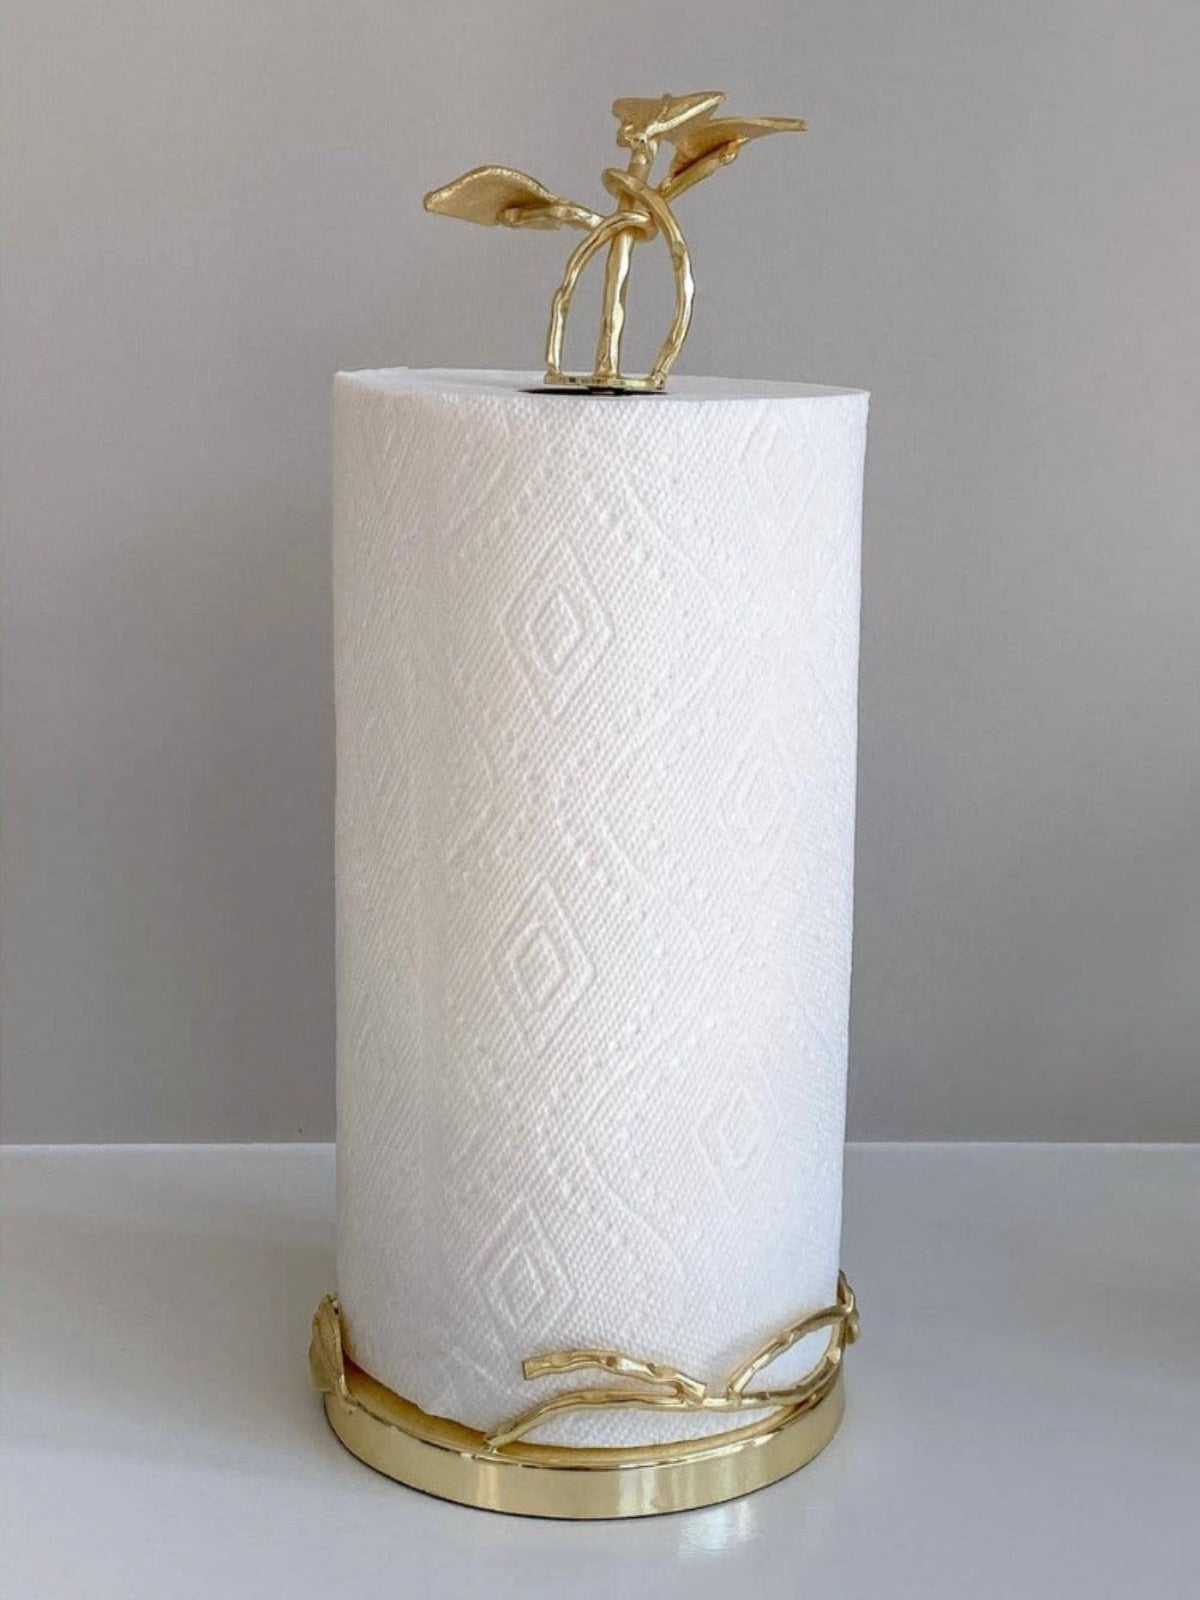 15H Luxury Gold Leaf Detailed Stainless Steel Paper Towel Holder.